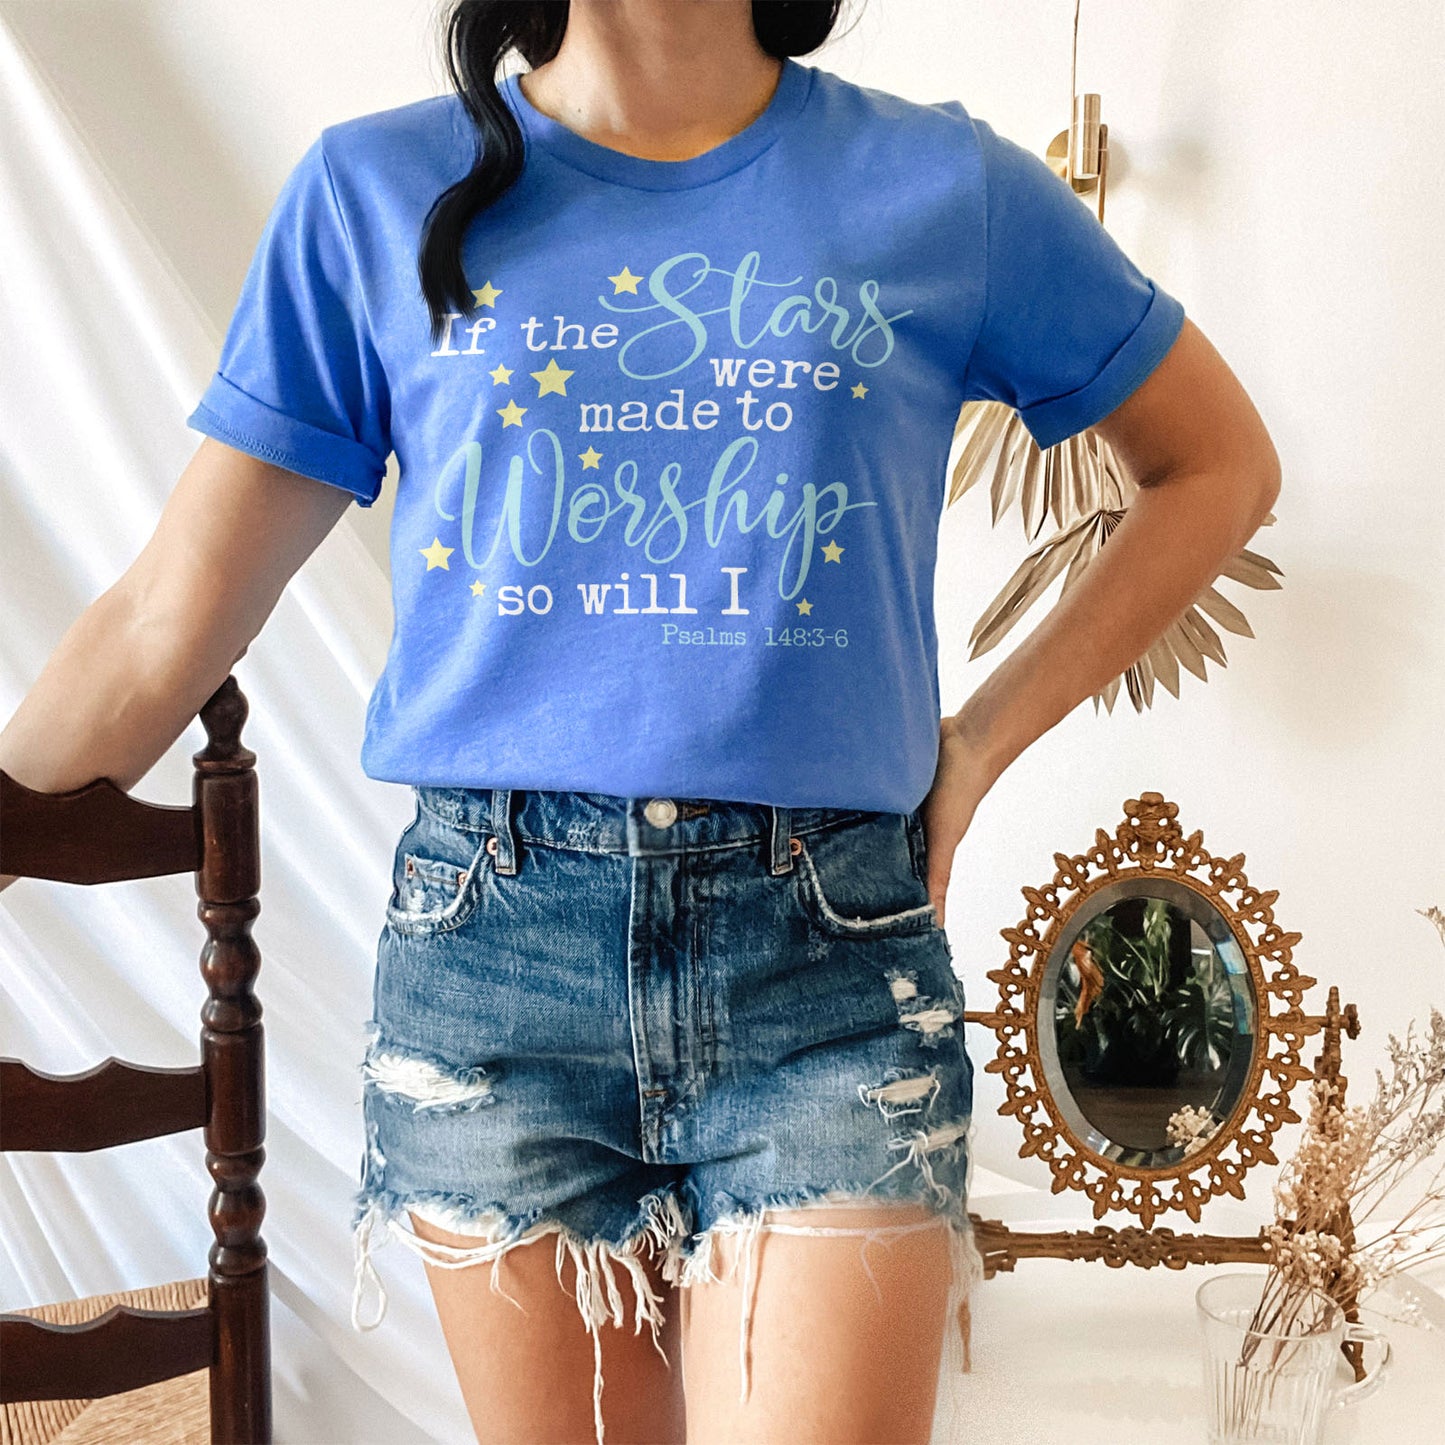 If The Stars Were Made To Worship Tee Shirts For Women - Christian Shirts for Women - Religious Tee Shirts